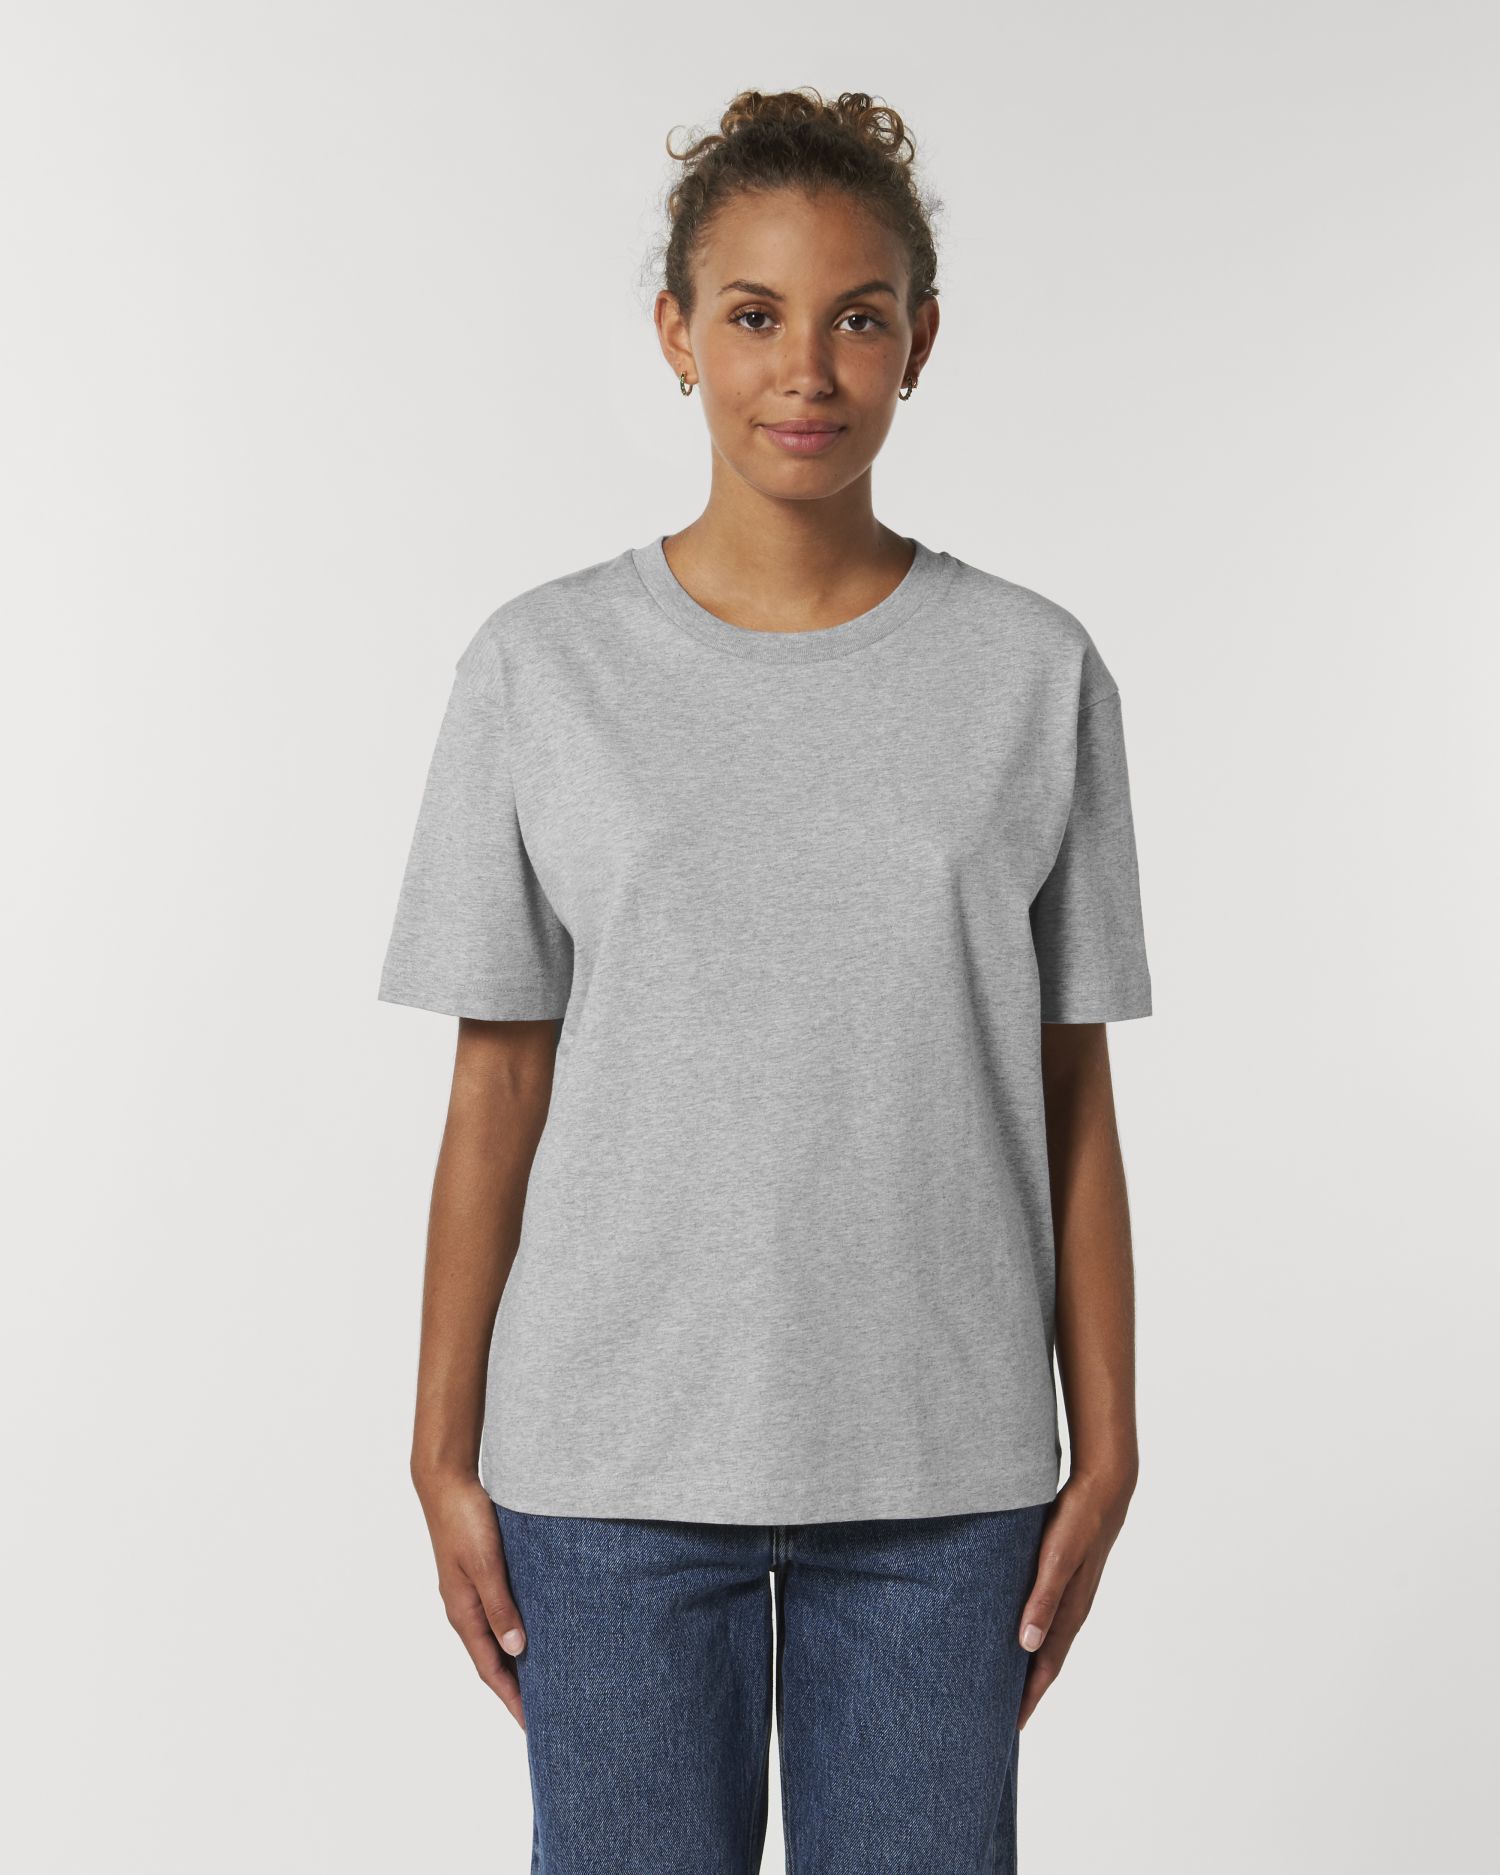 Be Famous Organic Unisex Relaxed T-shirt Heather Grey XXL